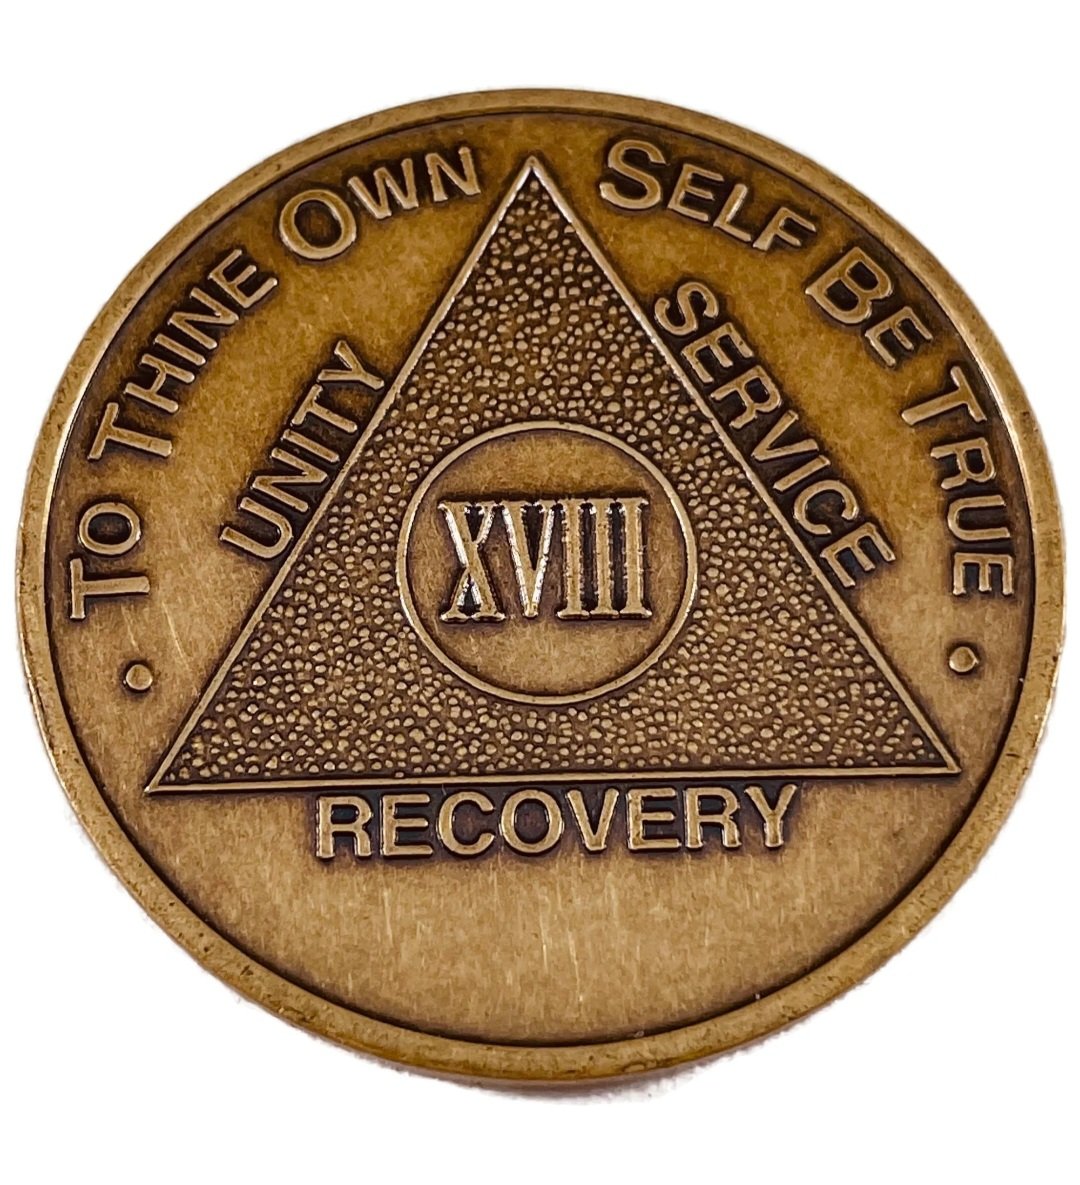 Thanks to the program of AA and a Higher Power, and the Fellowship I celebrate 18 years of continuous Sobriety. #RecoveryPosse